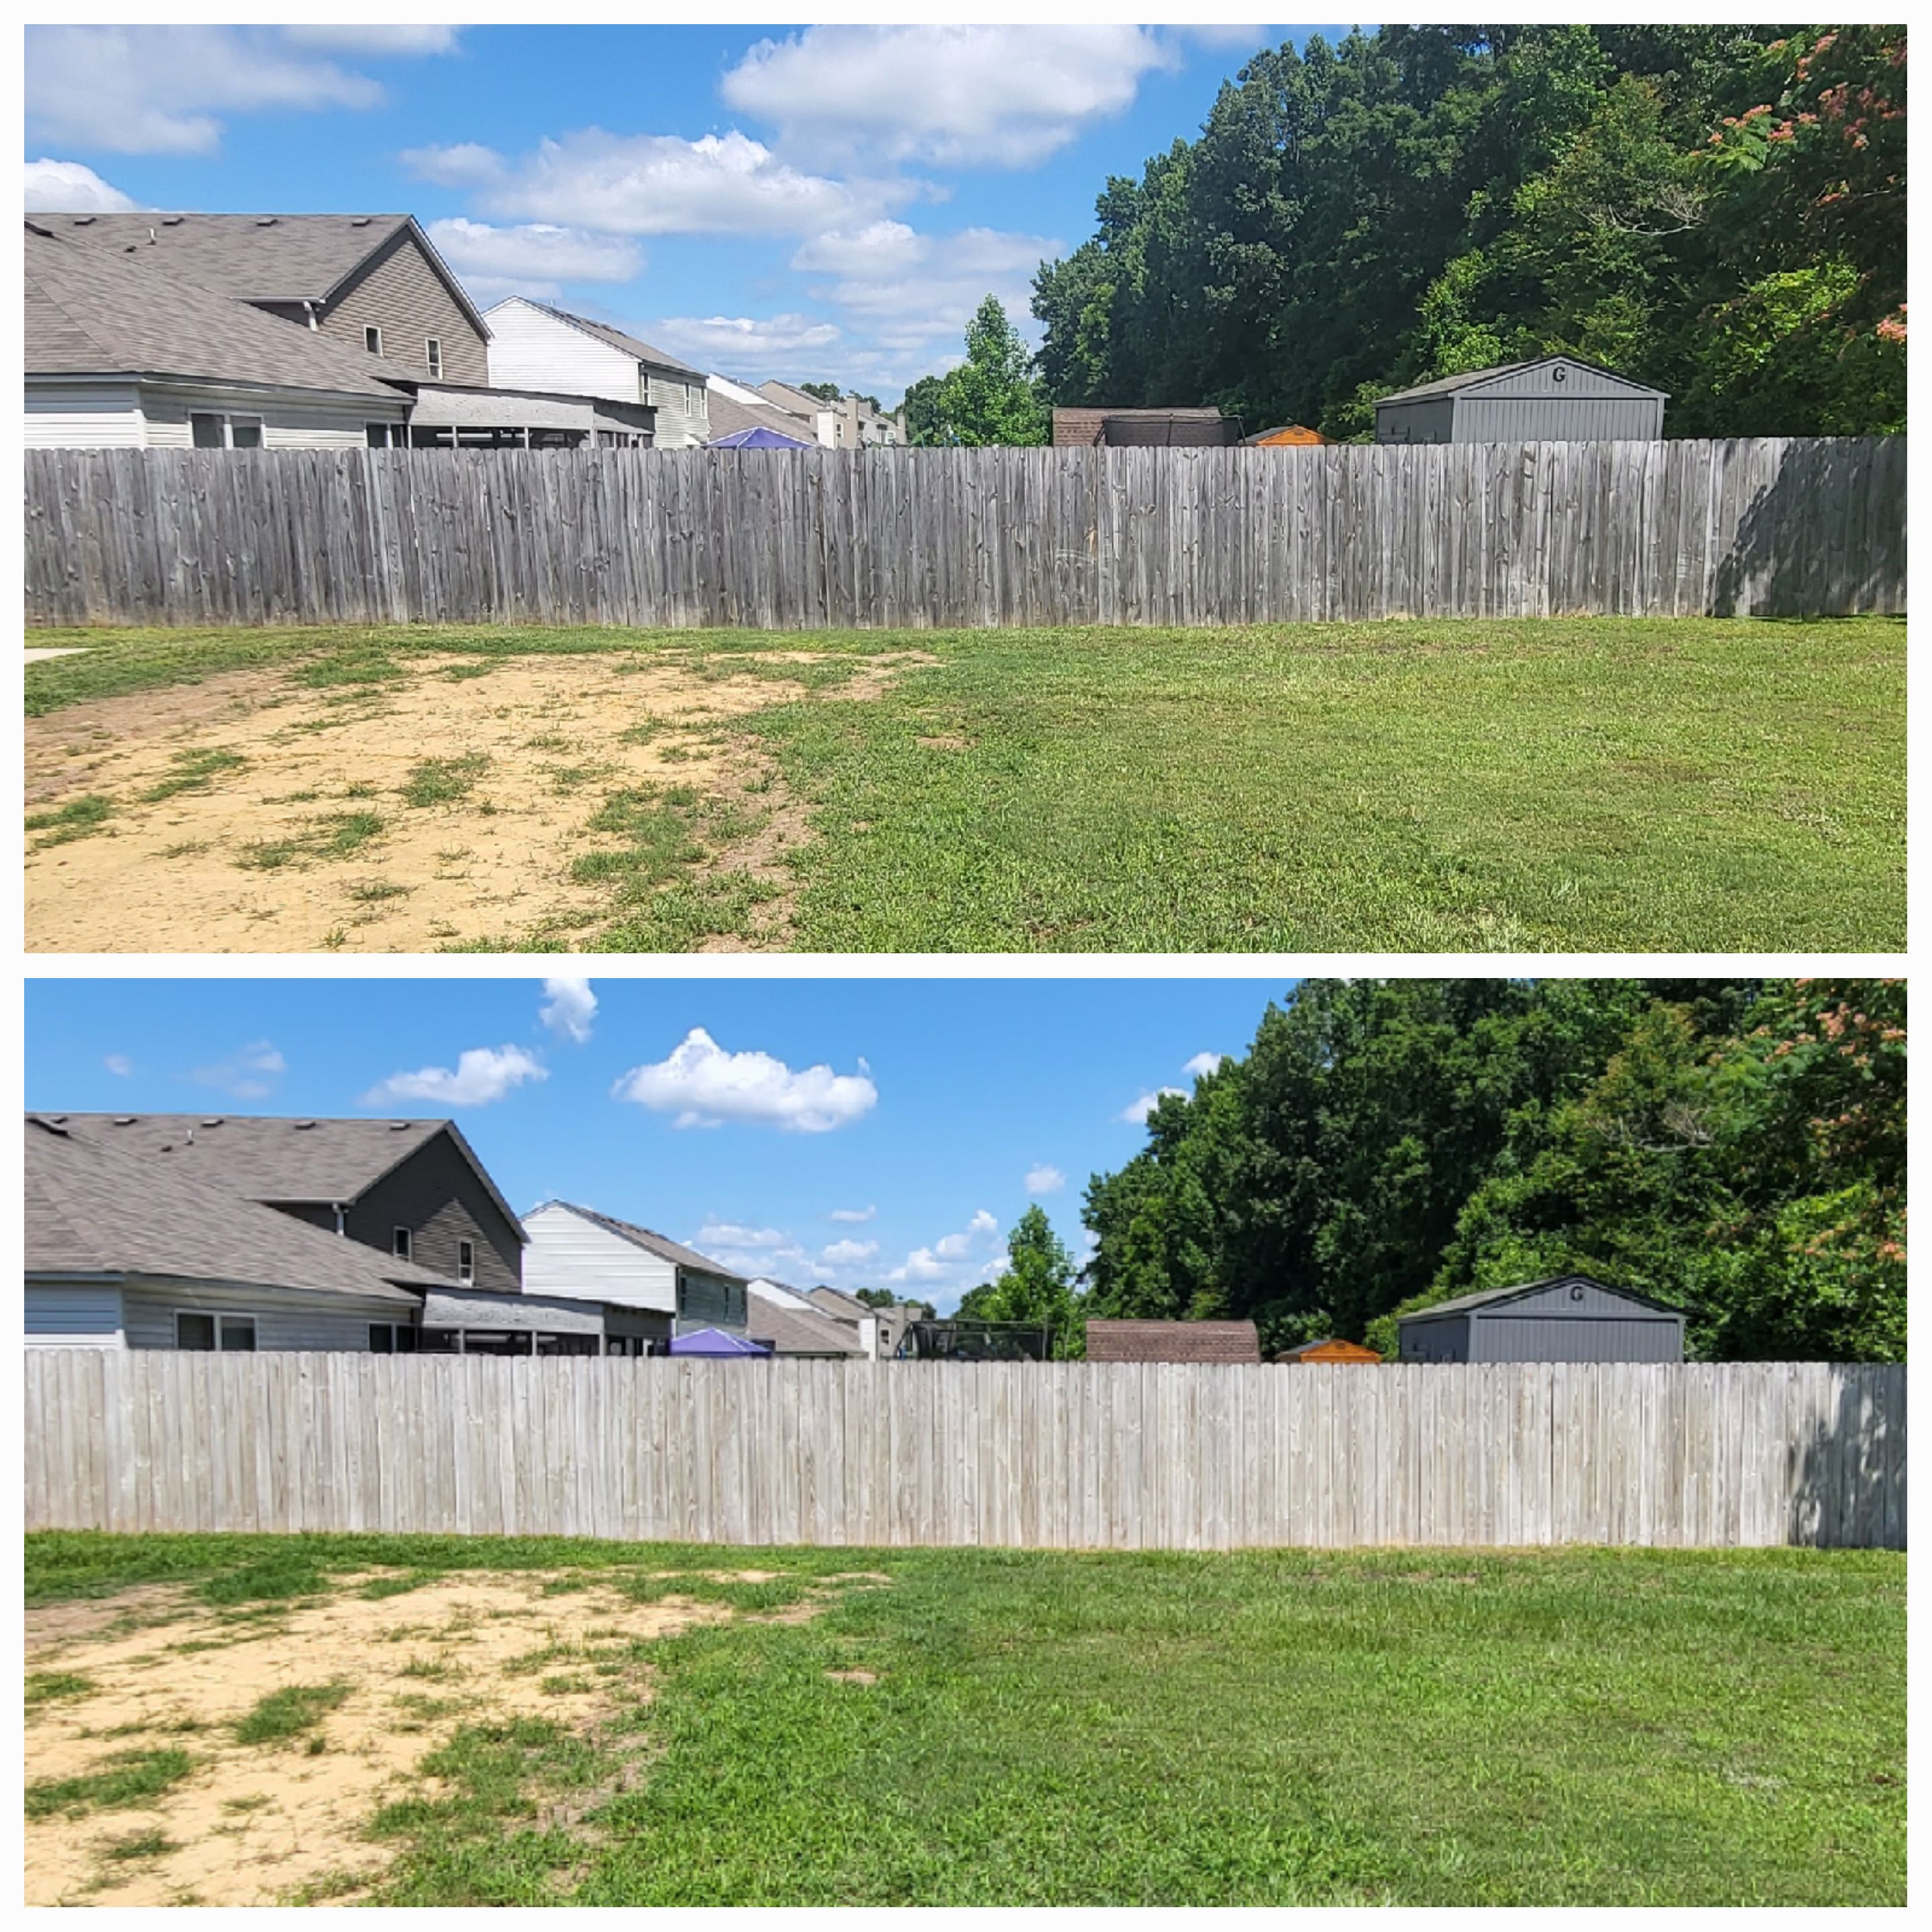 WOODEN PRIVACY FENCE CLEANING IN TUSCALOOSA, AL